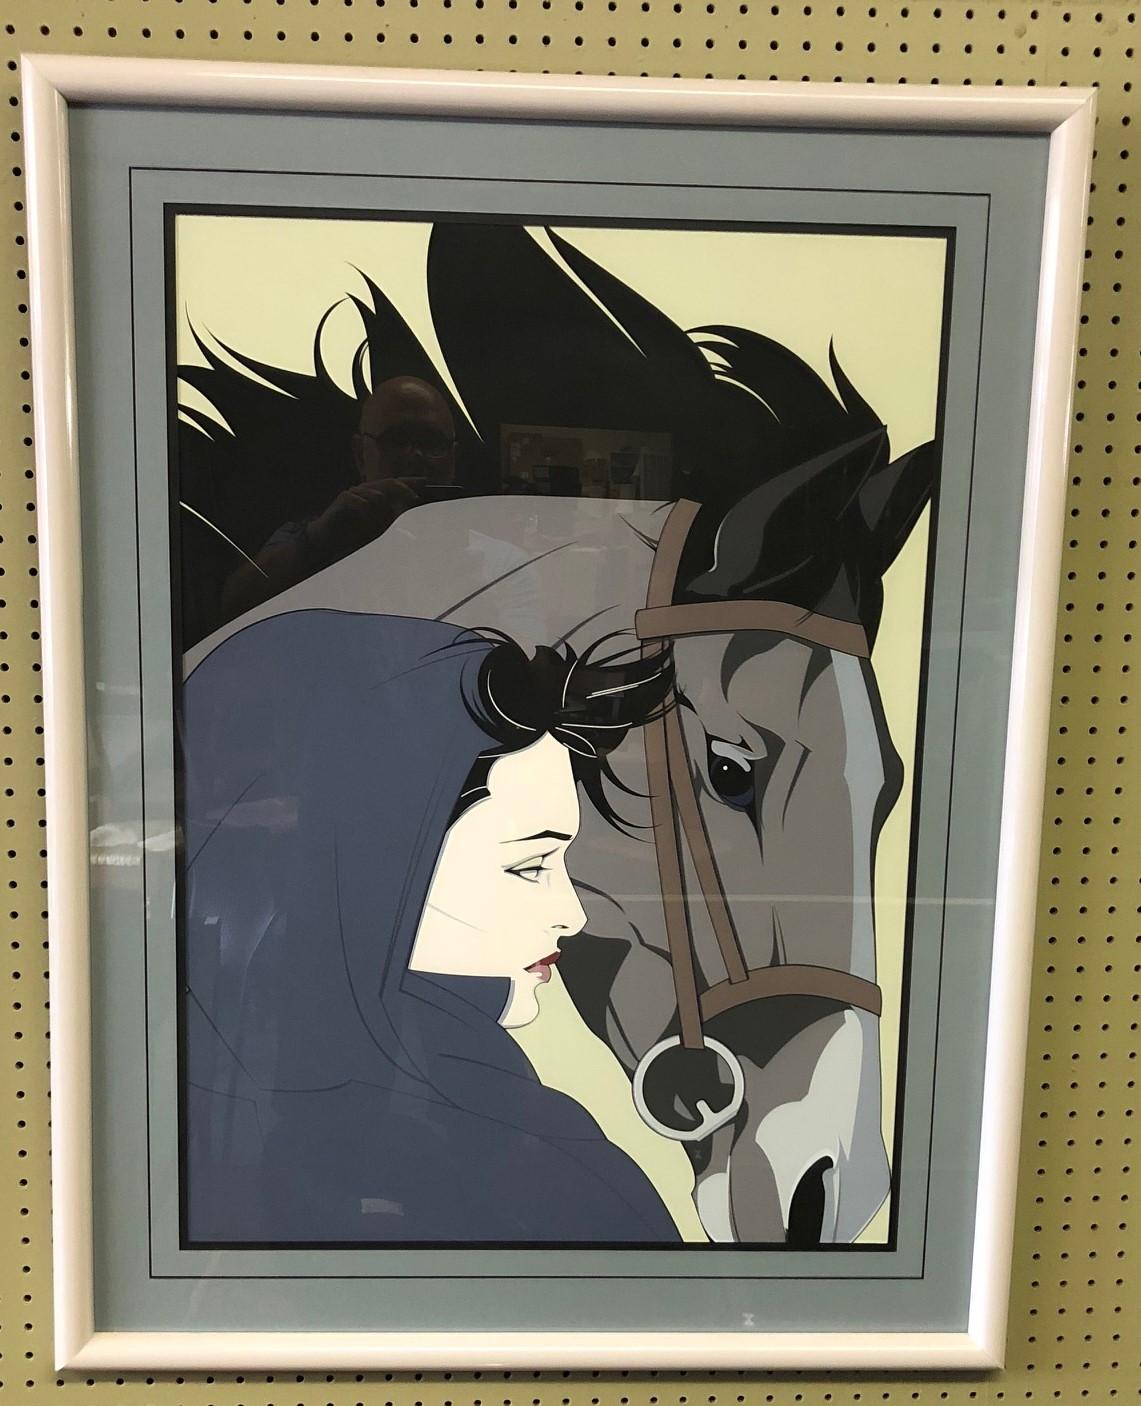 Modern Limited Edition Serigraph by Patrick Nagel